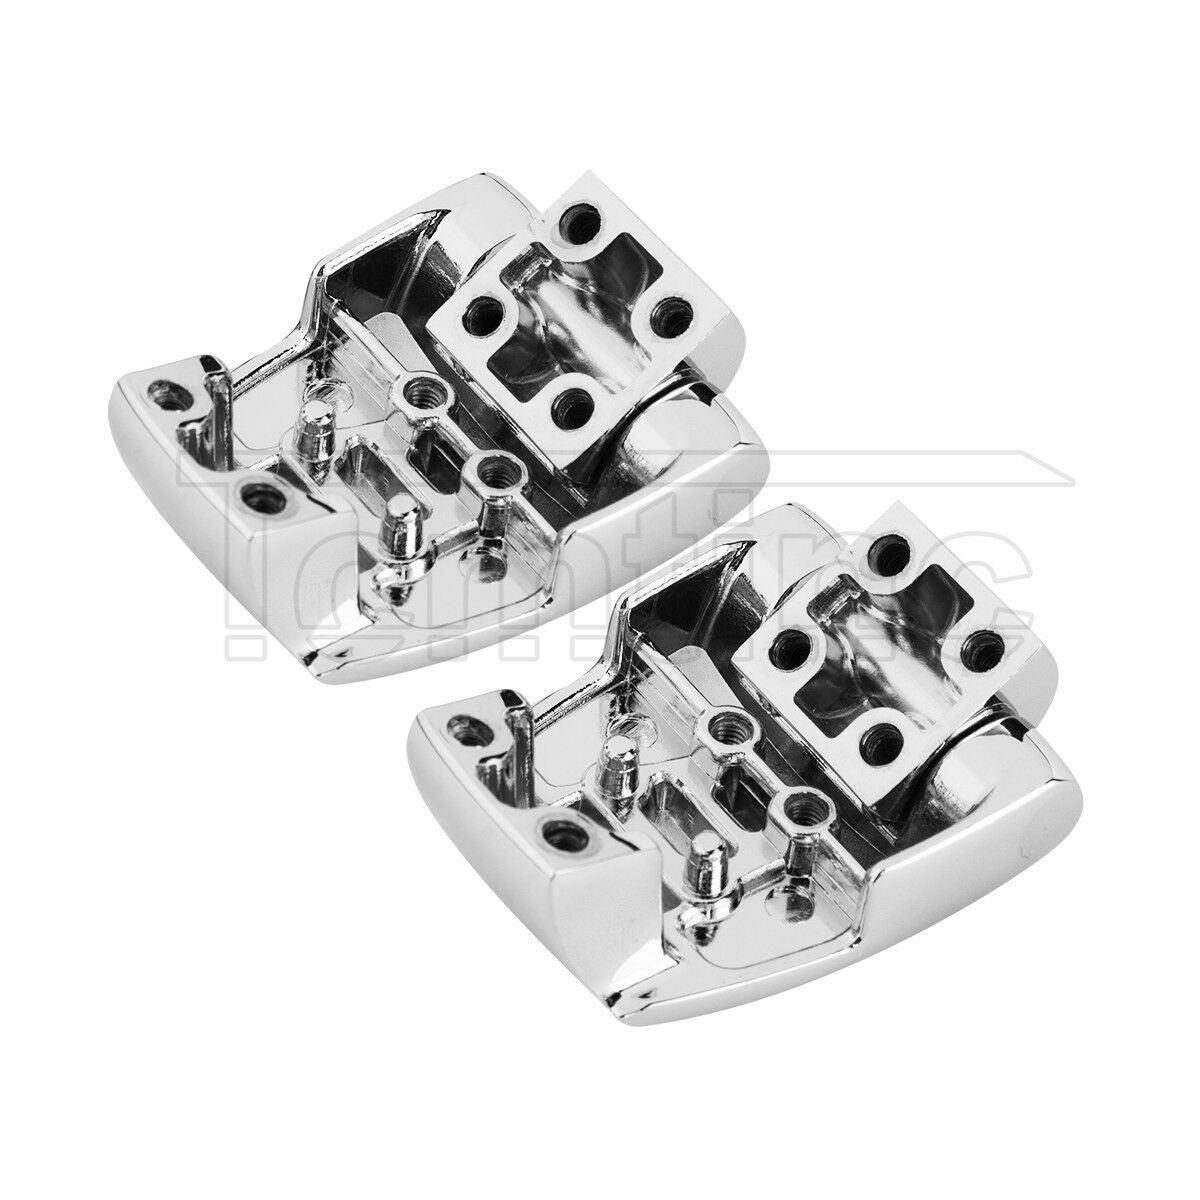 Chrome Trunk Lock Hinges For Harley Tour Pak CVO Road King Street Glide 88-13 - Moto Life Products